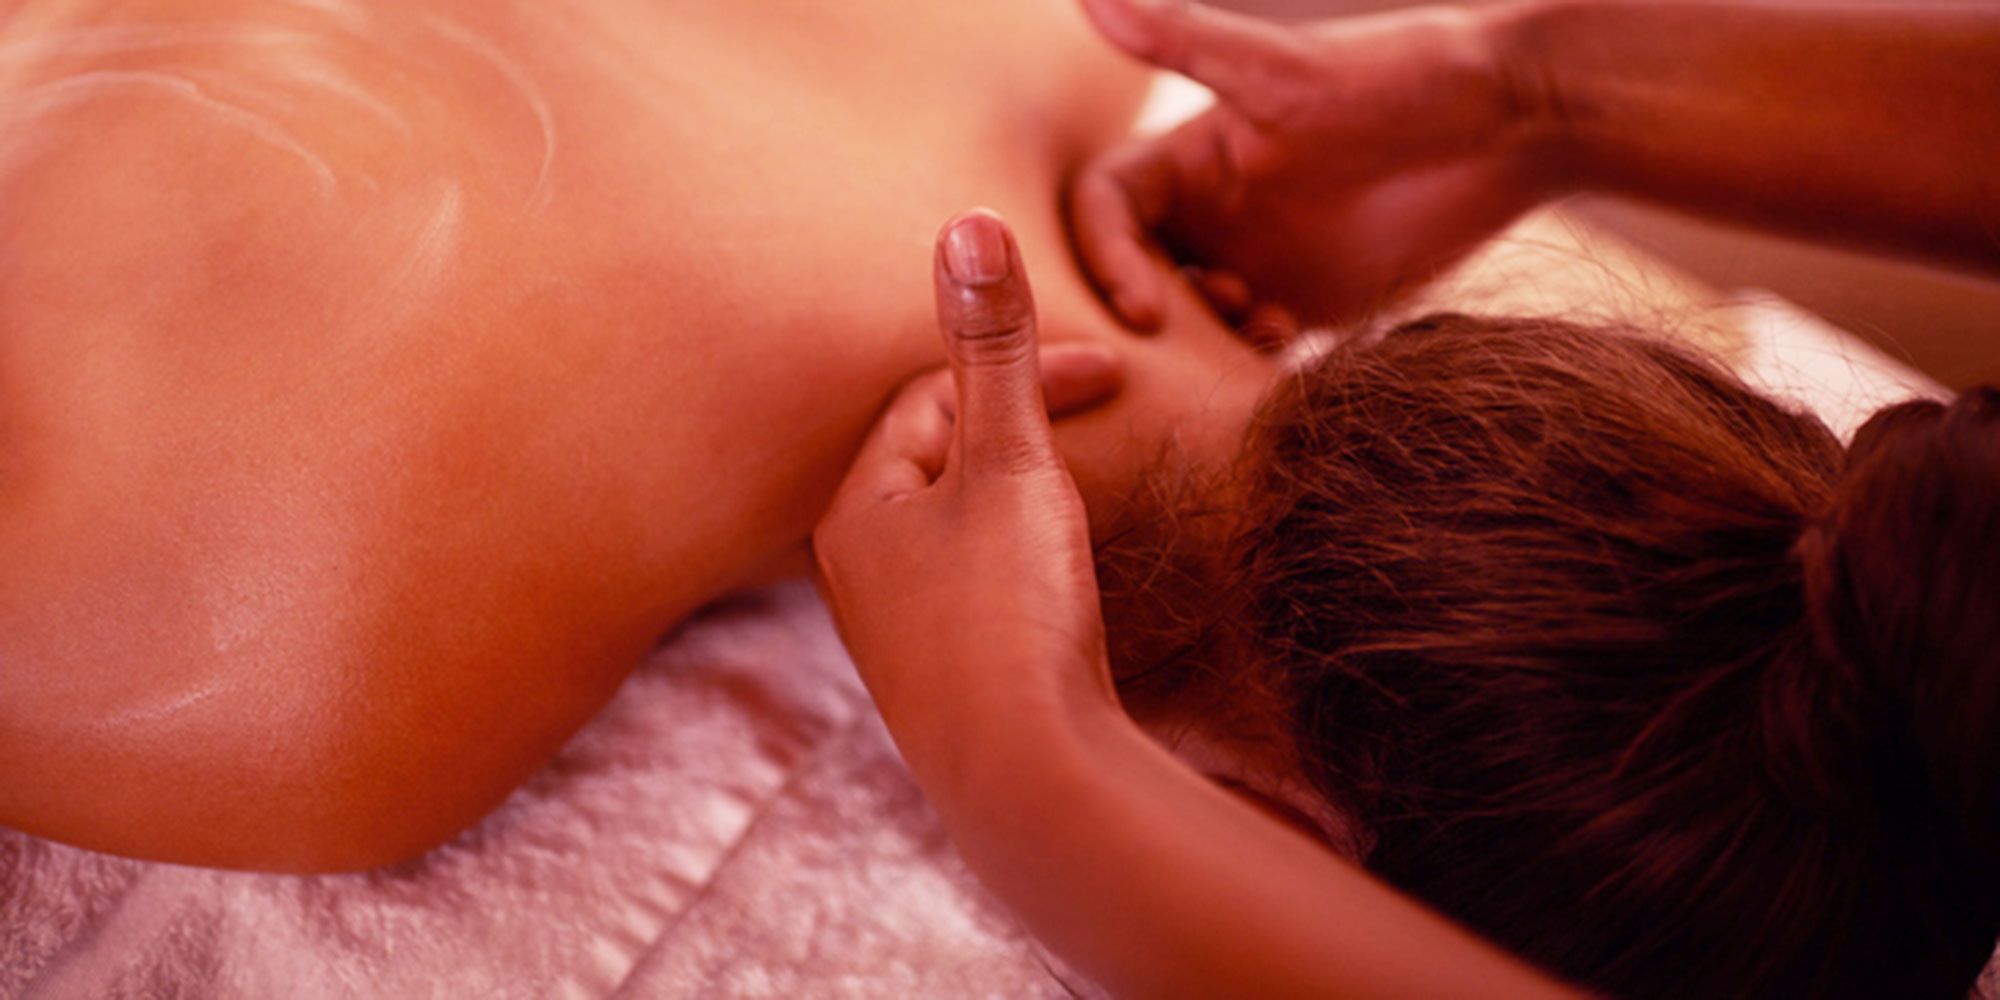 Orgasmic massage stories from women who pay a stranger